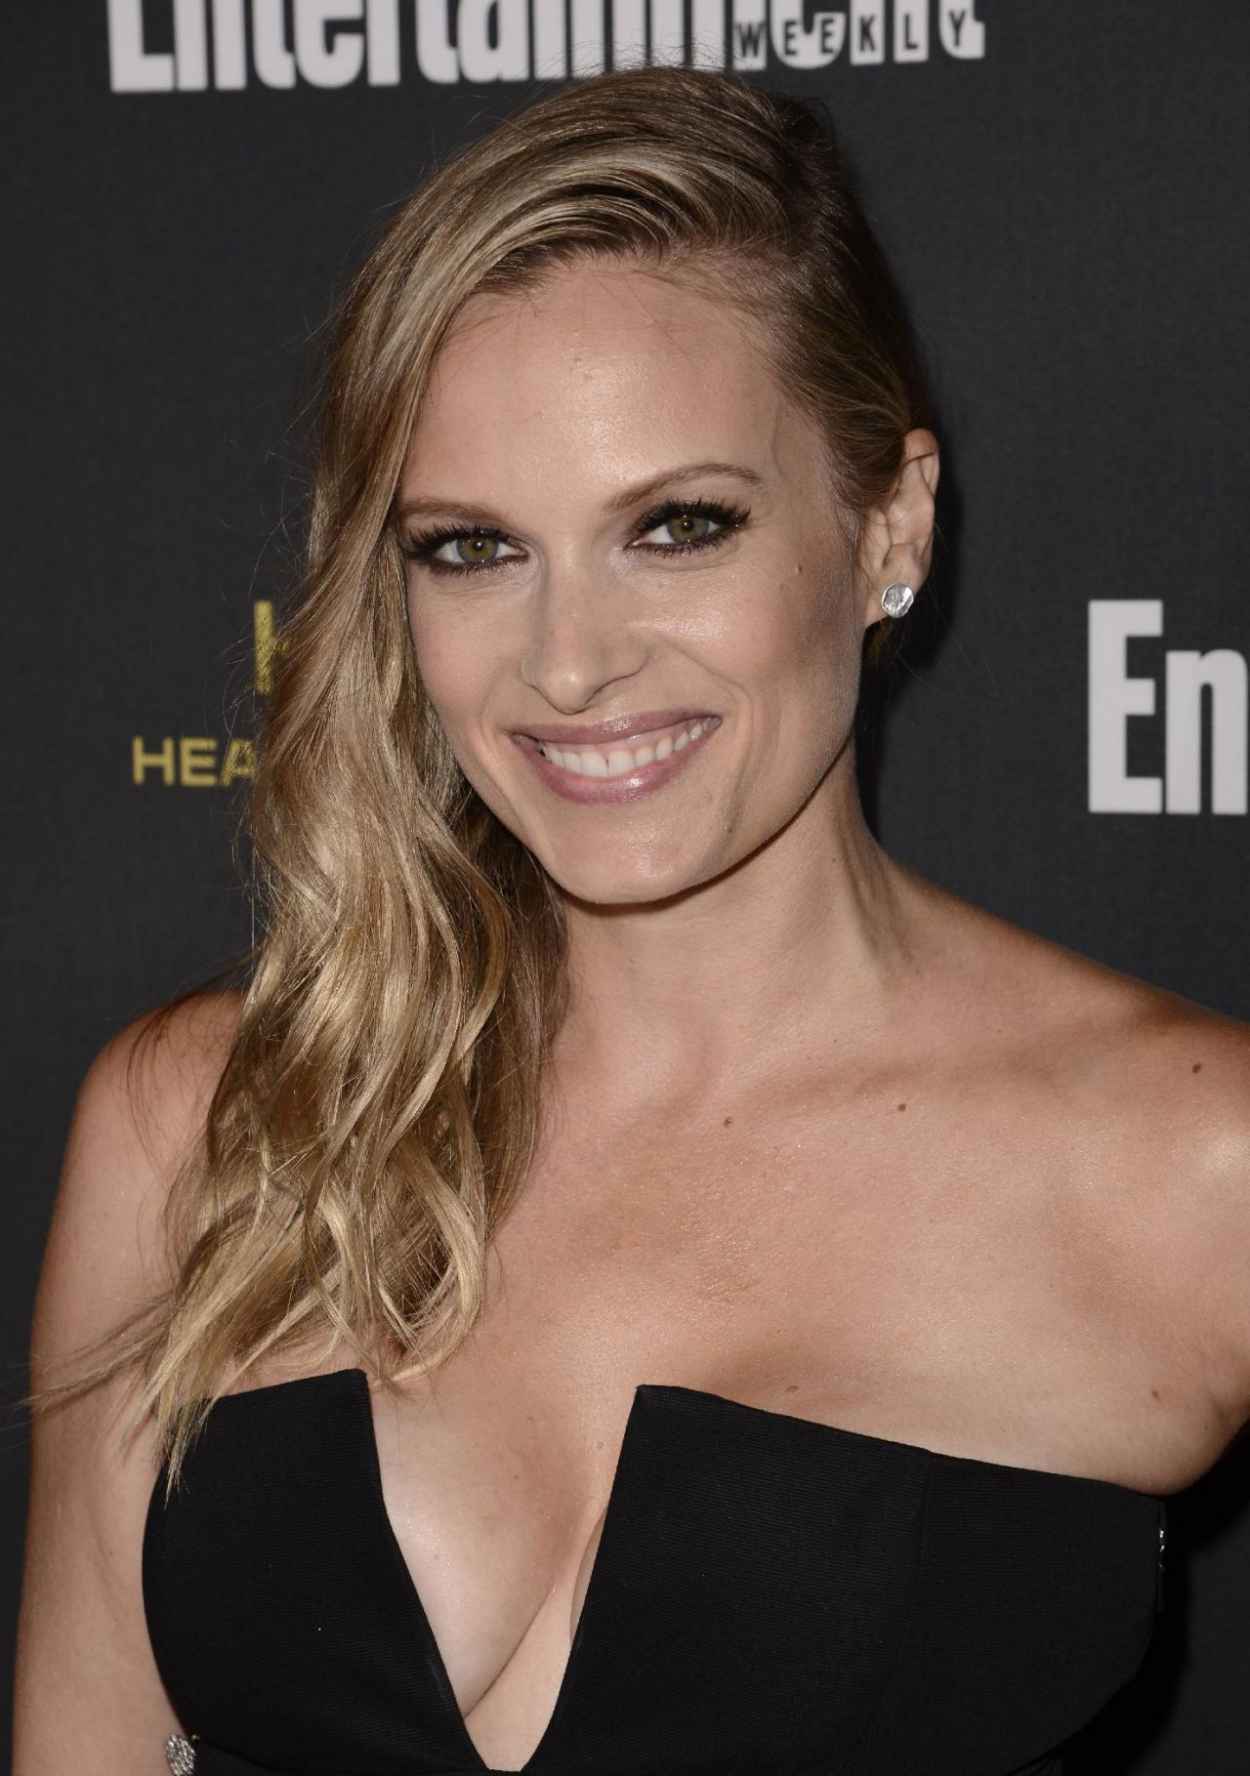 Vinessa Shaw Entertainment Weeklys Pre-Emmy 2015 Party in West Hollywood 